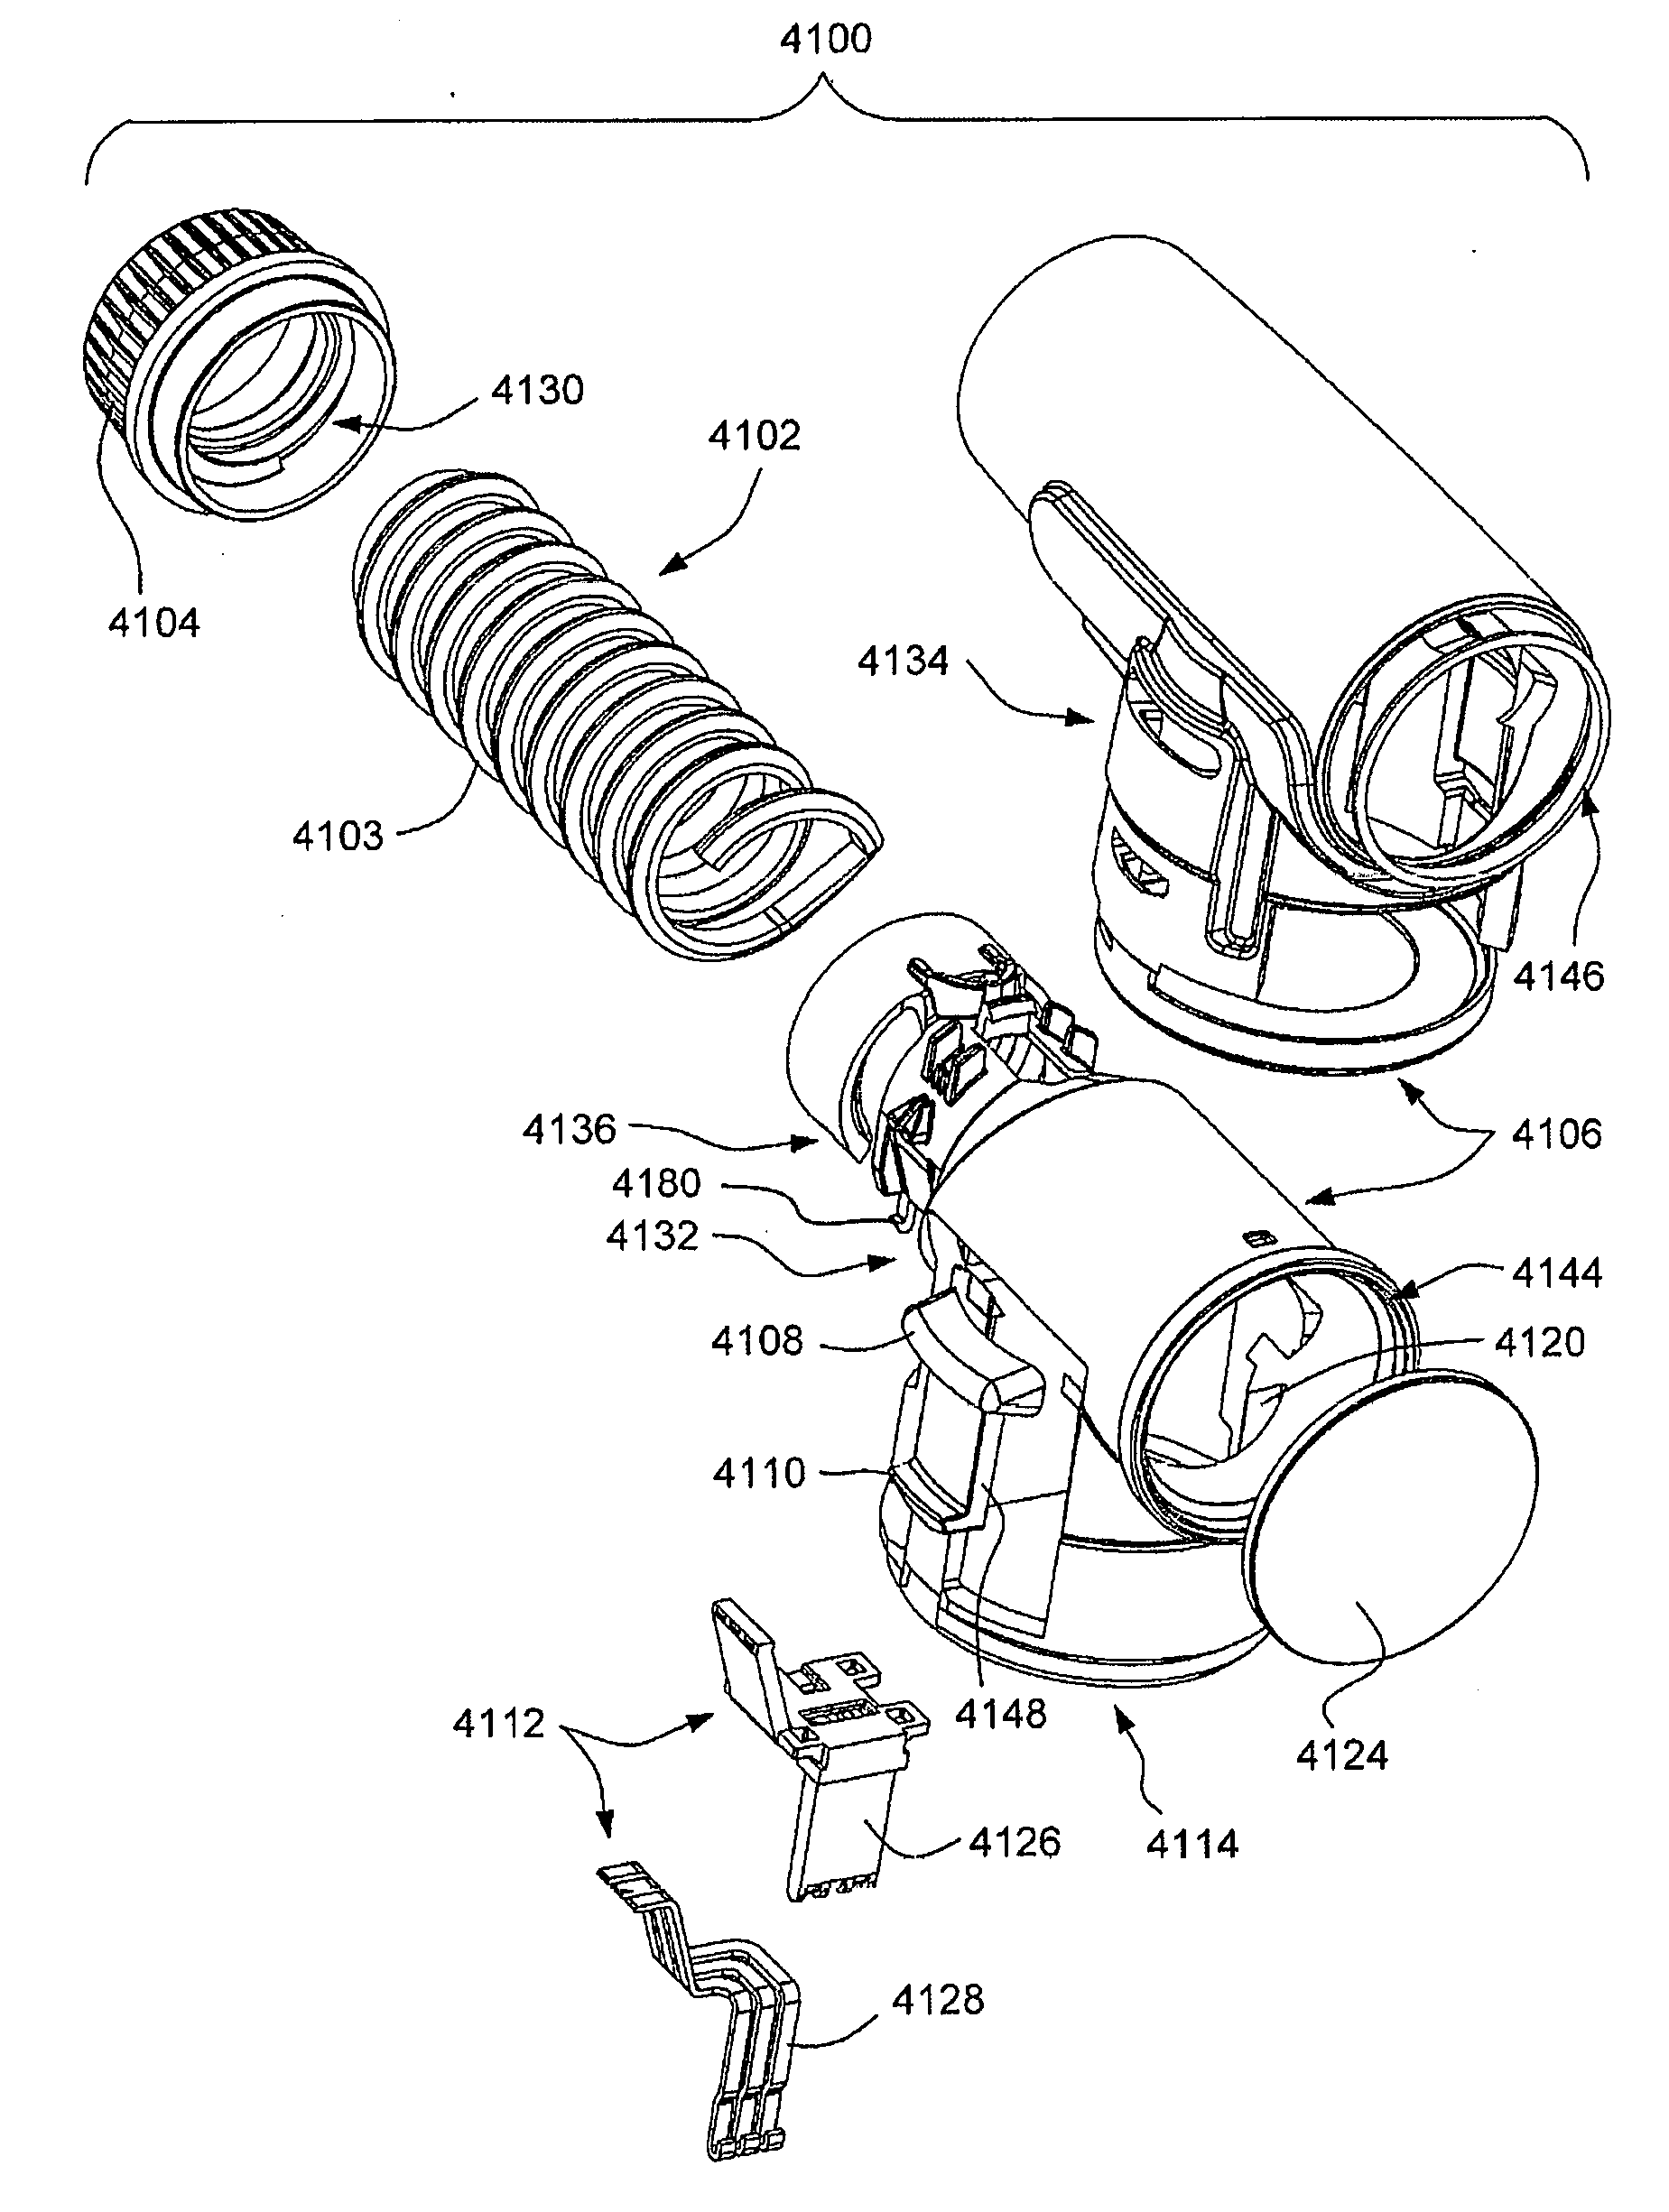 Outlet connection assembly and method of making the same